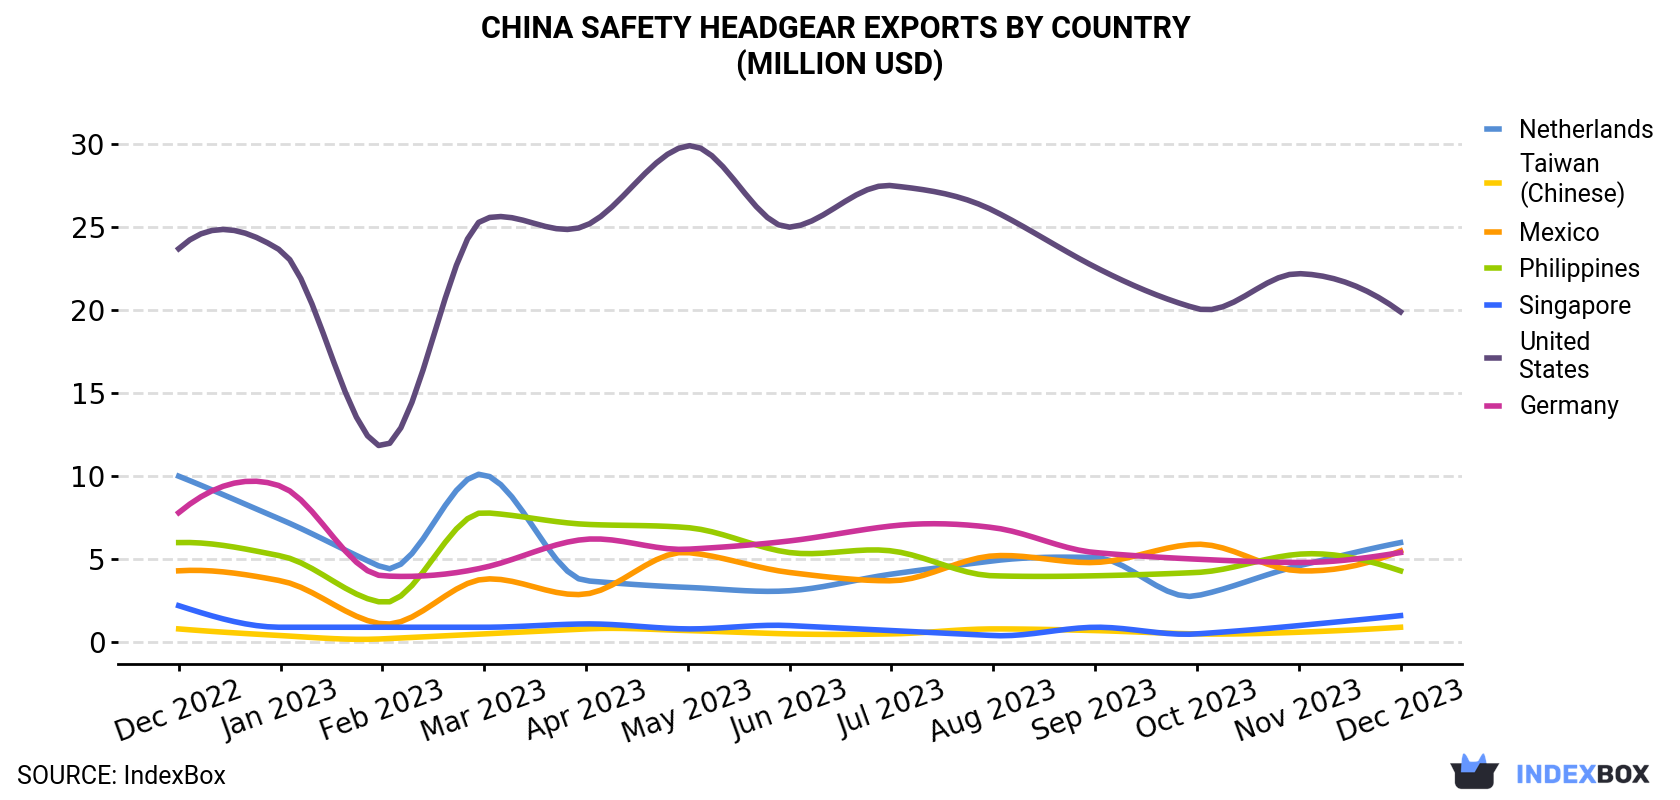 China Safety Headgear Exports By Country (Million USD)